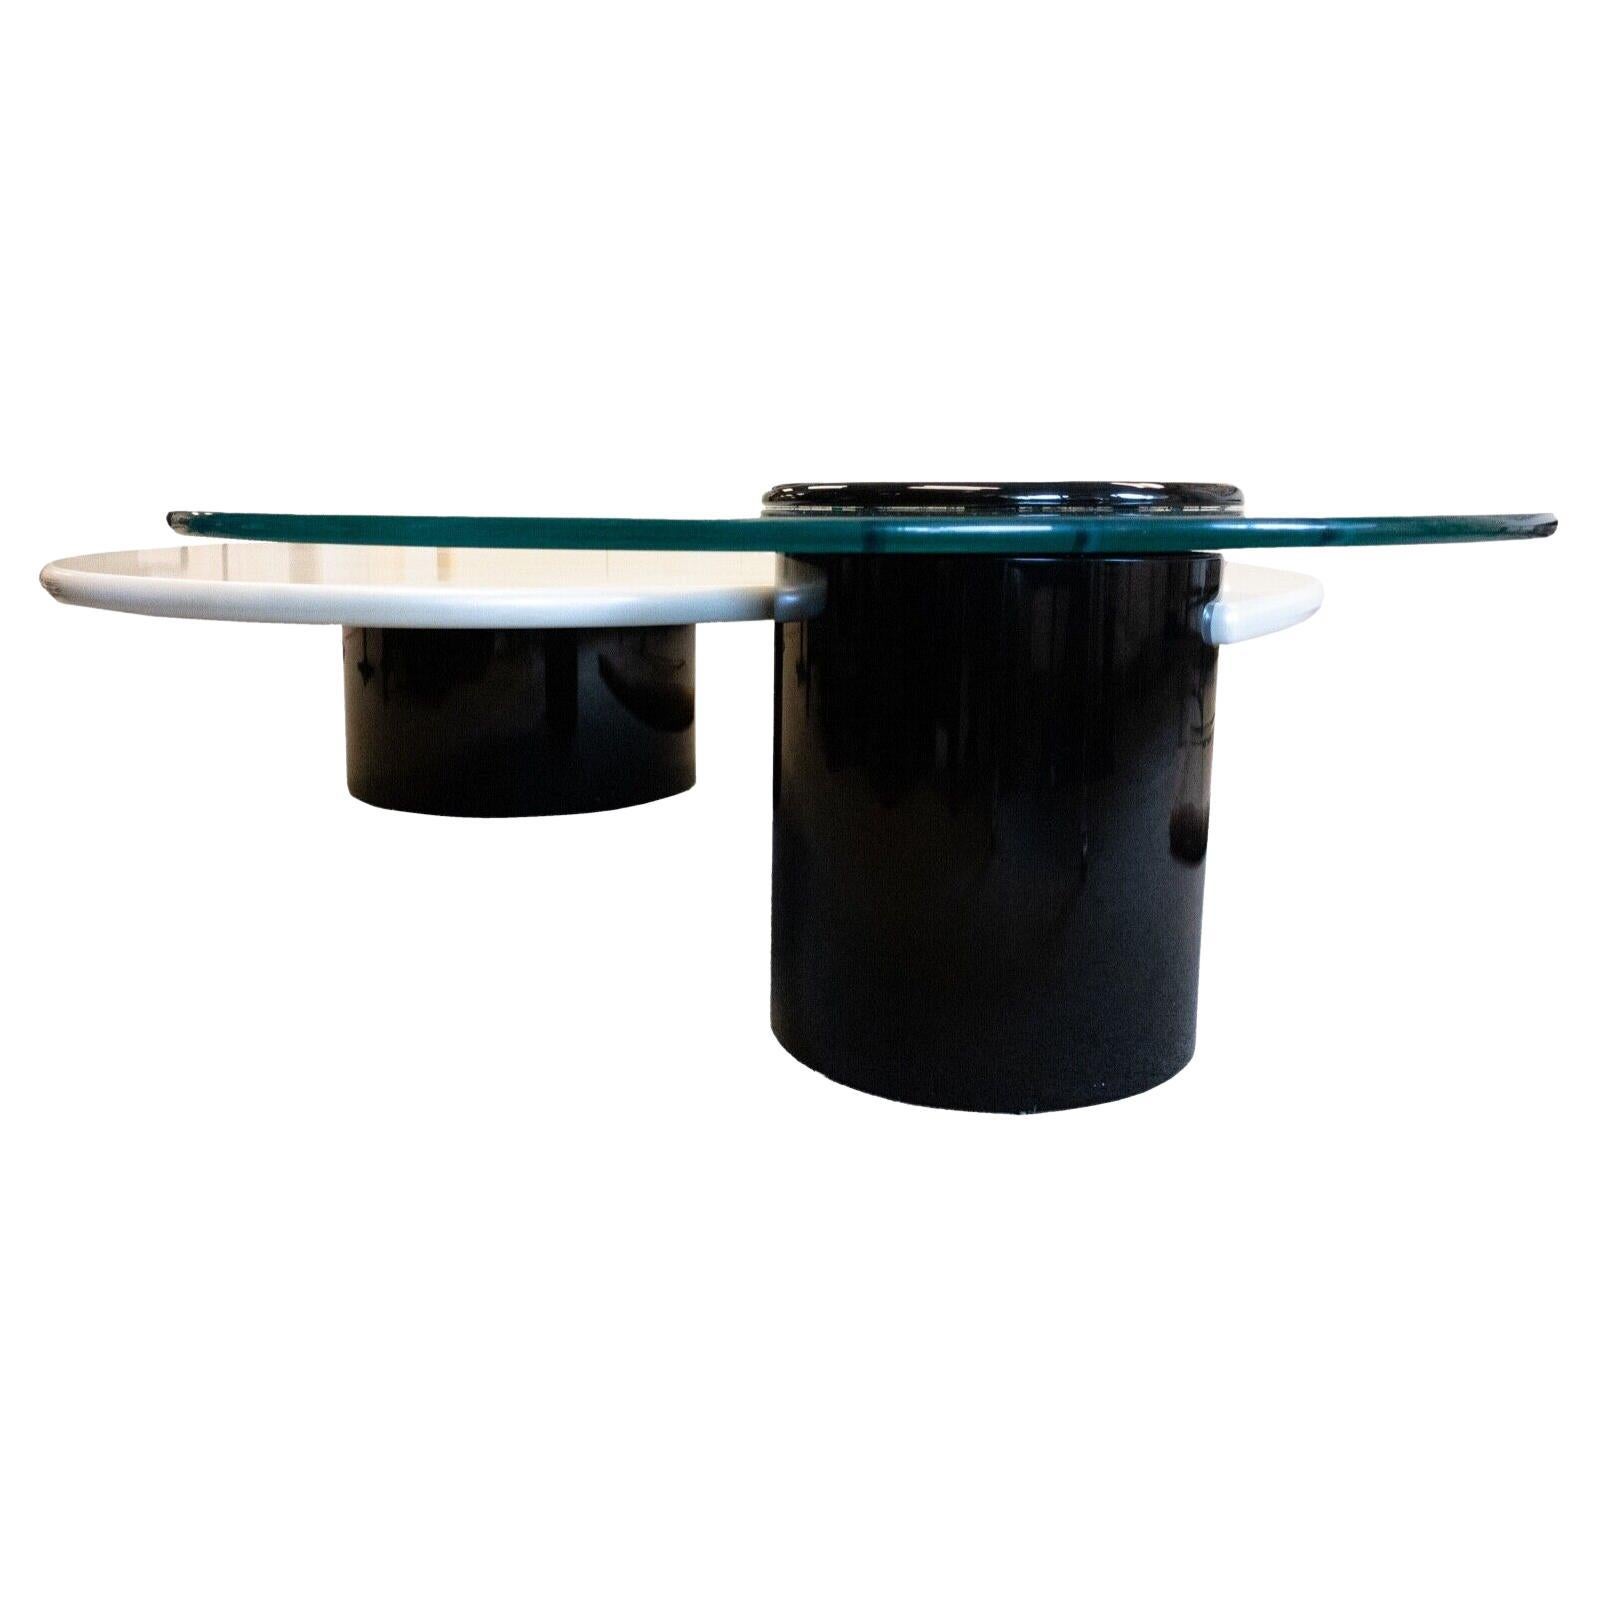 A Post Modern stunning coffee table by Canadian brand Rougier. This sculptural table features two large black laminate columns, a pearlized finish laminate table top and a rotating glass top that can swivel out (or be removed entirely). In excellent